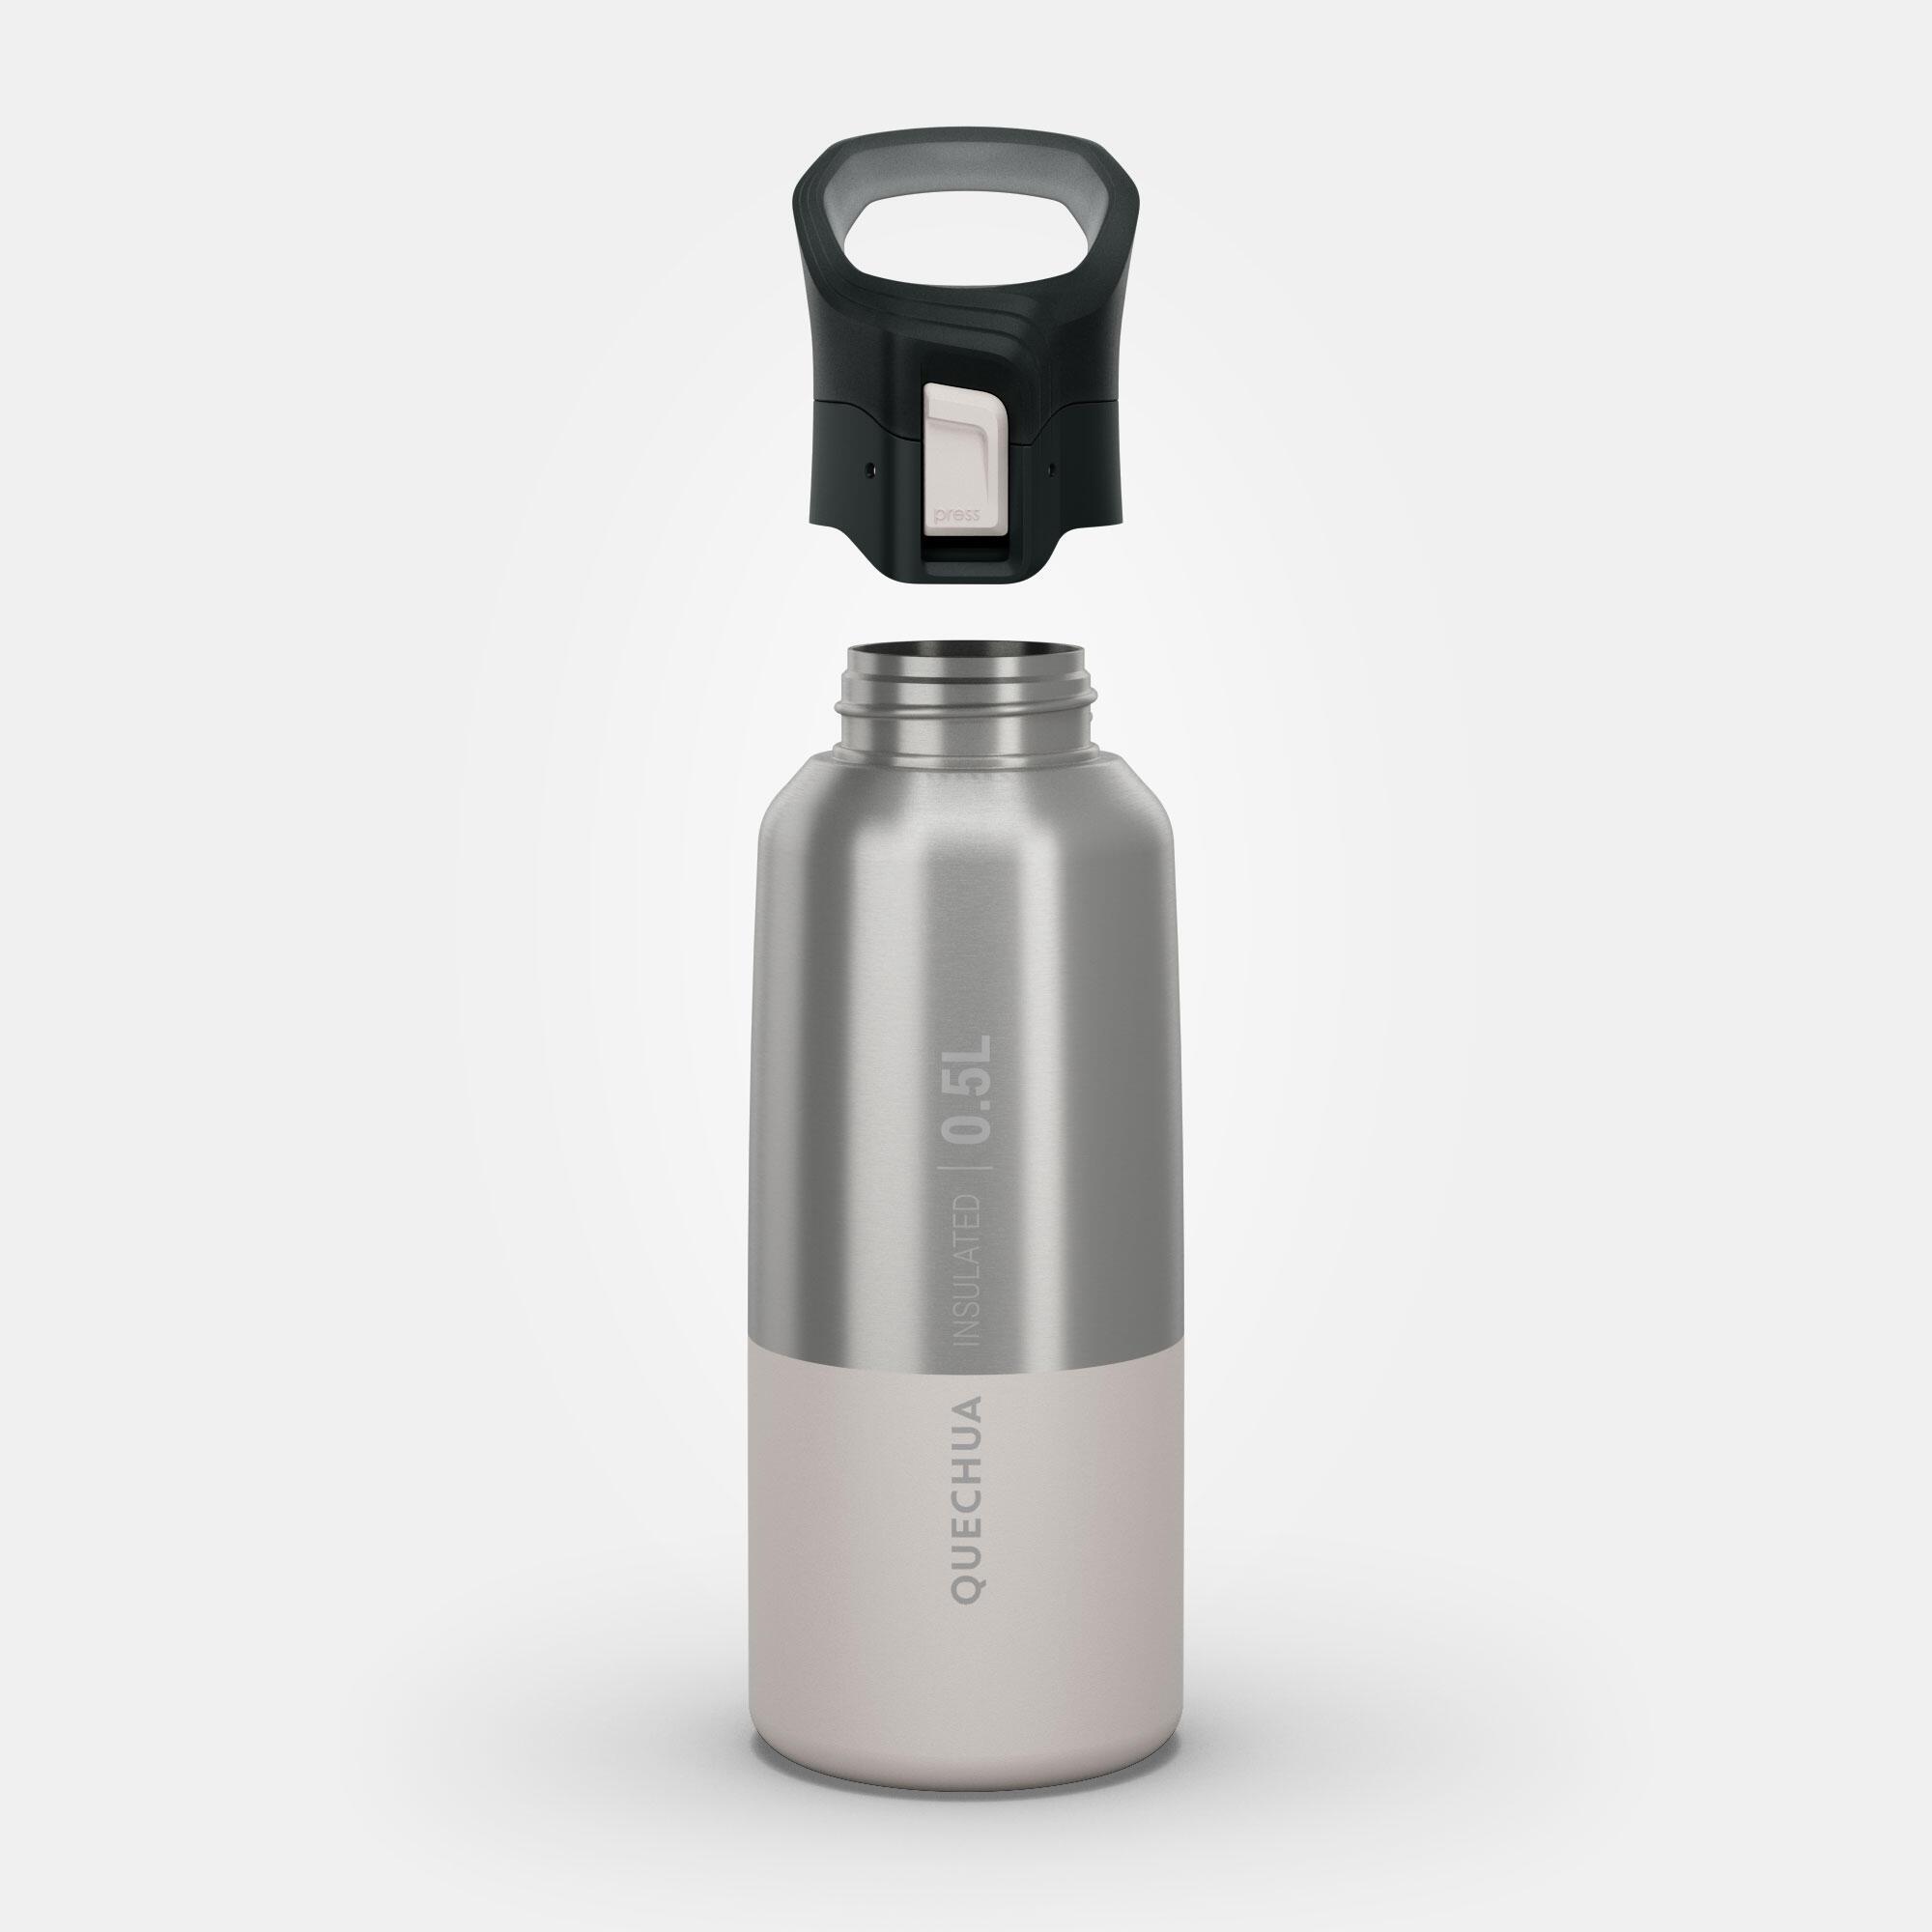 QUECHUA Isolierflasche - MH500 ISO  